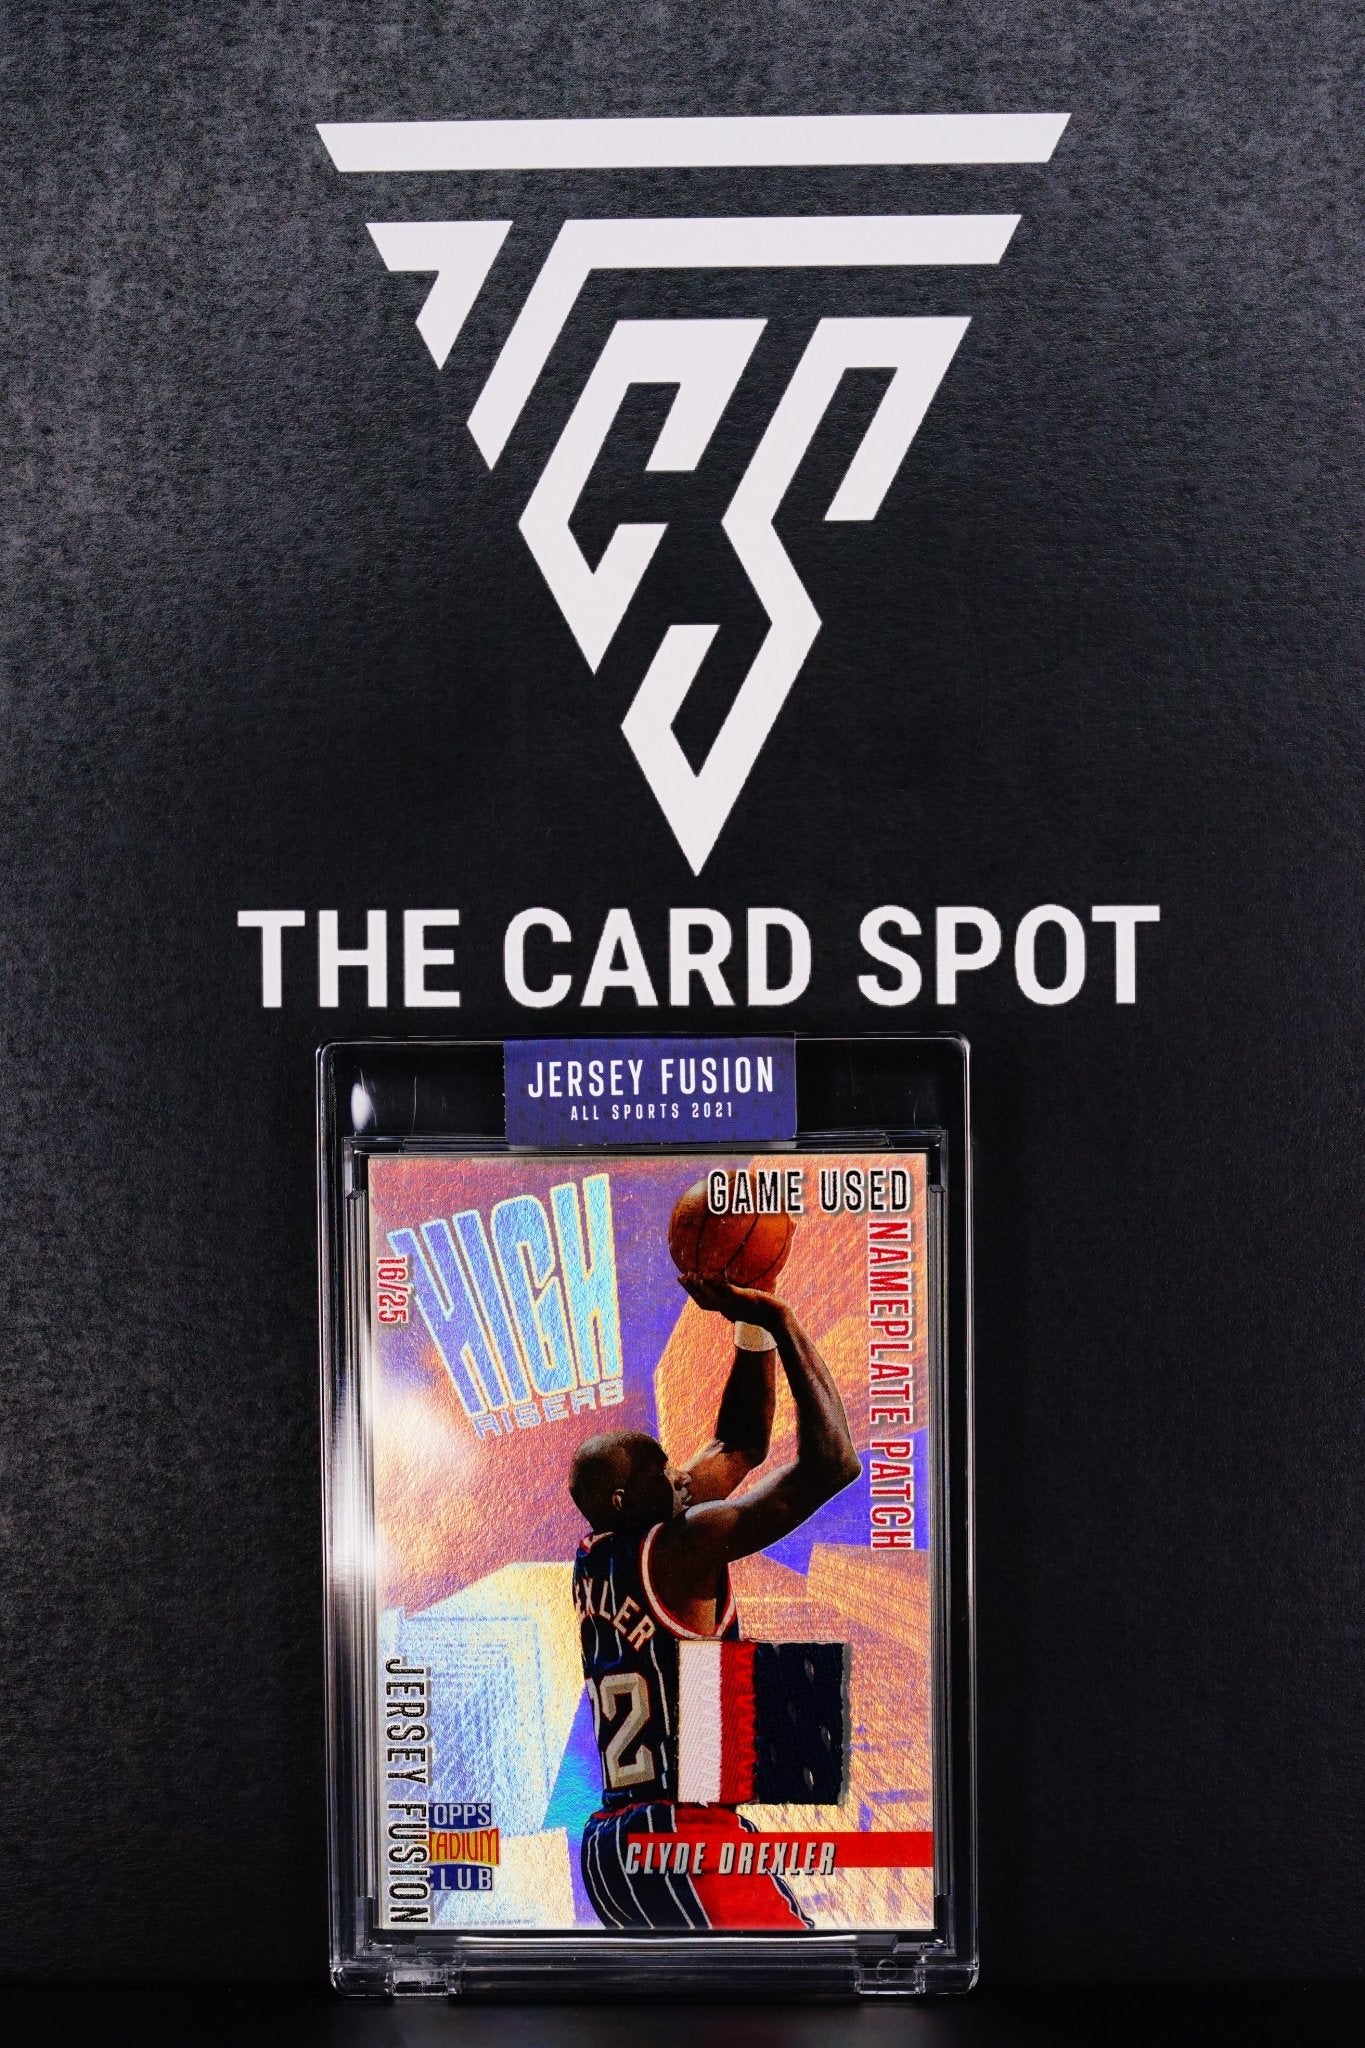 Basketball card: Clyde Drexler Name plate patch 16/25 Limited edition - THE CARD SPOT PTY LTD.Sports CardJersey Fusion